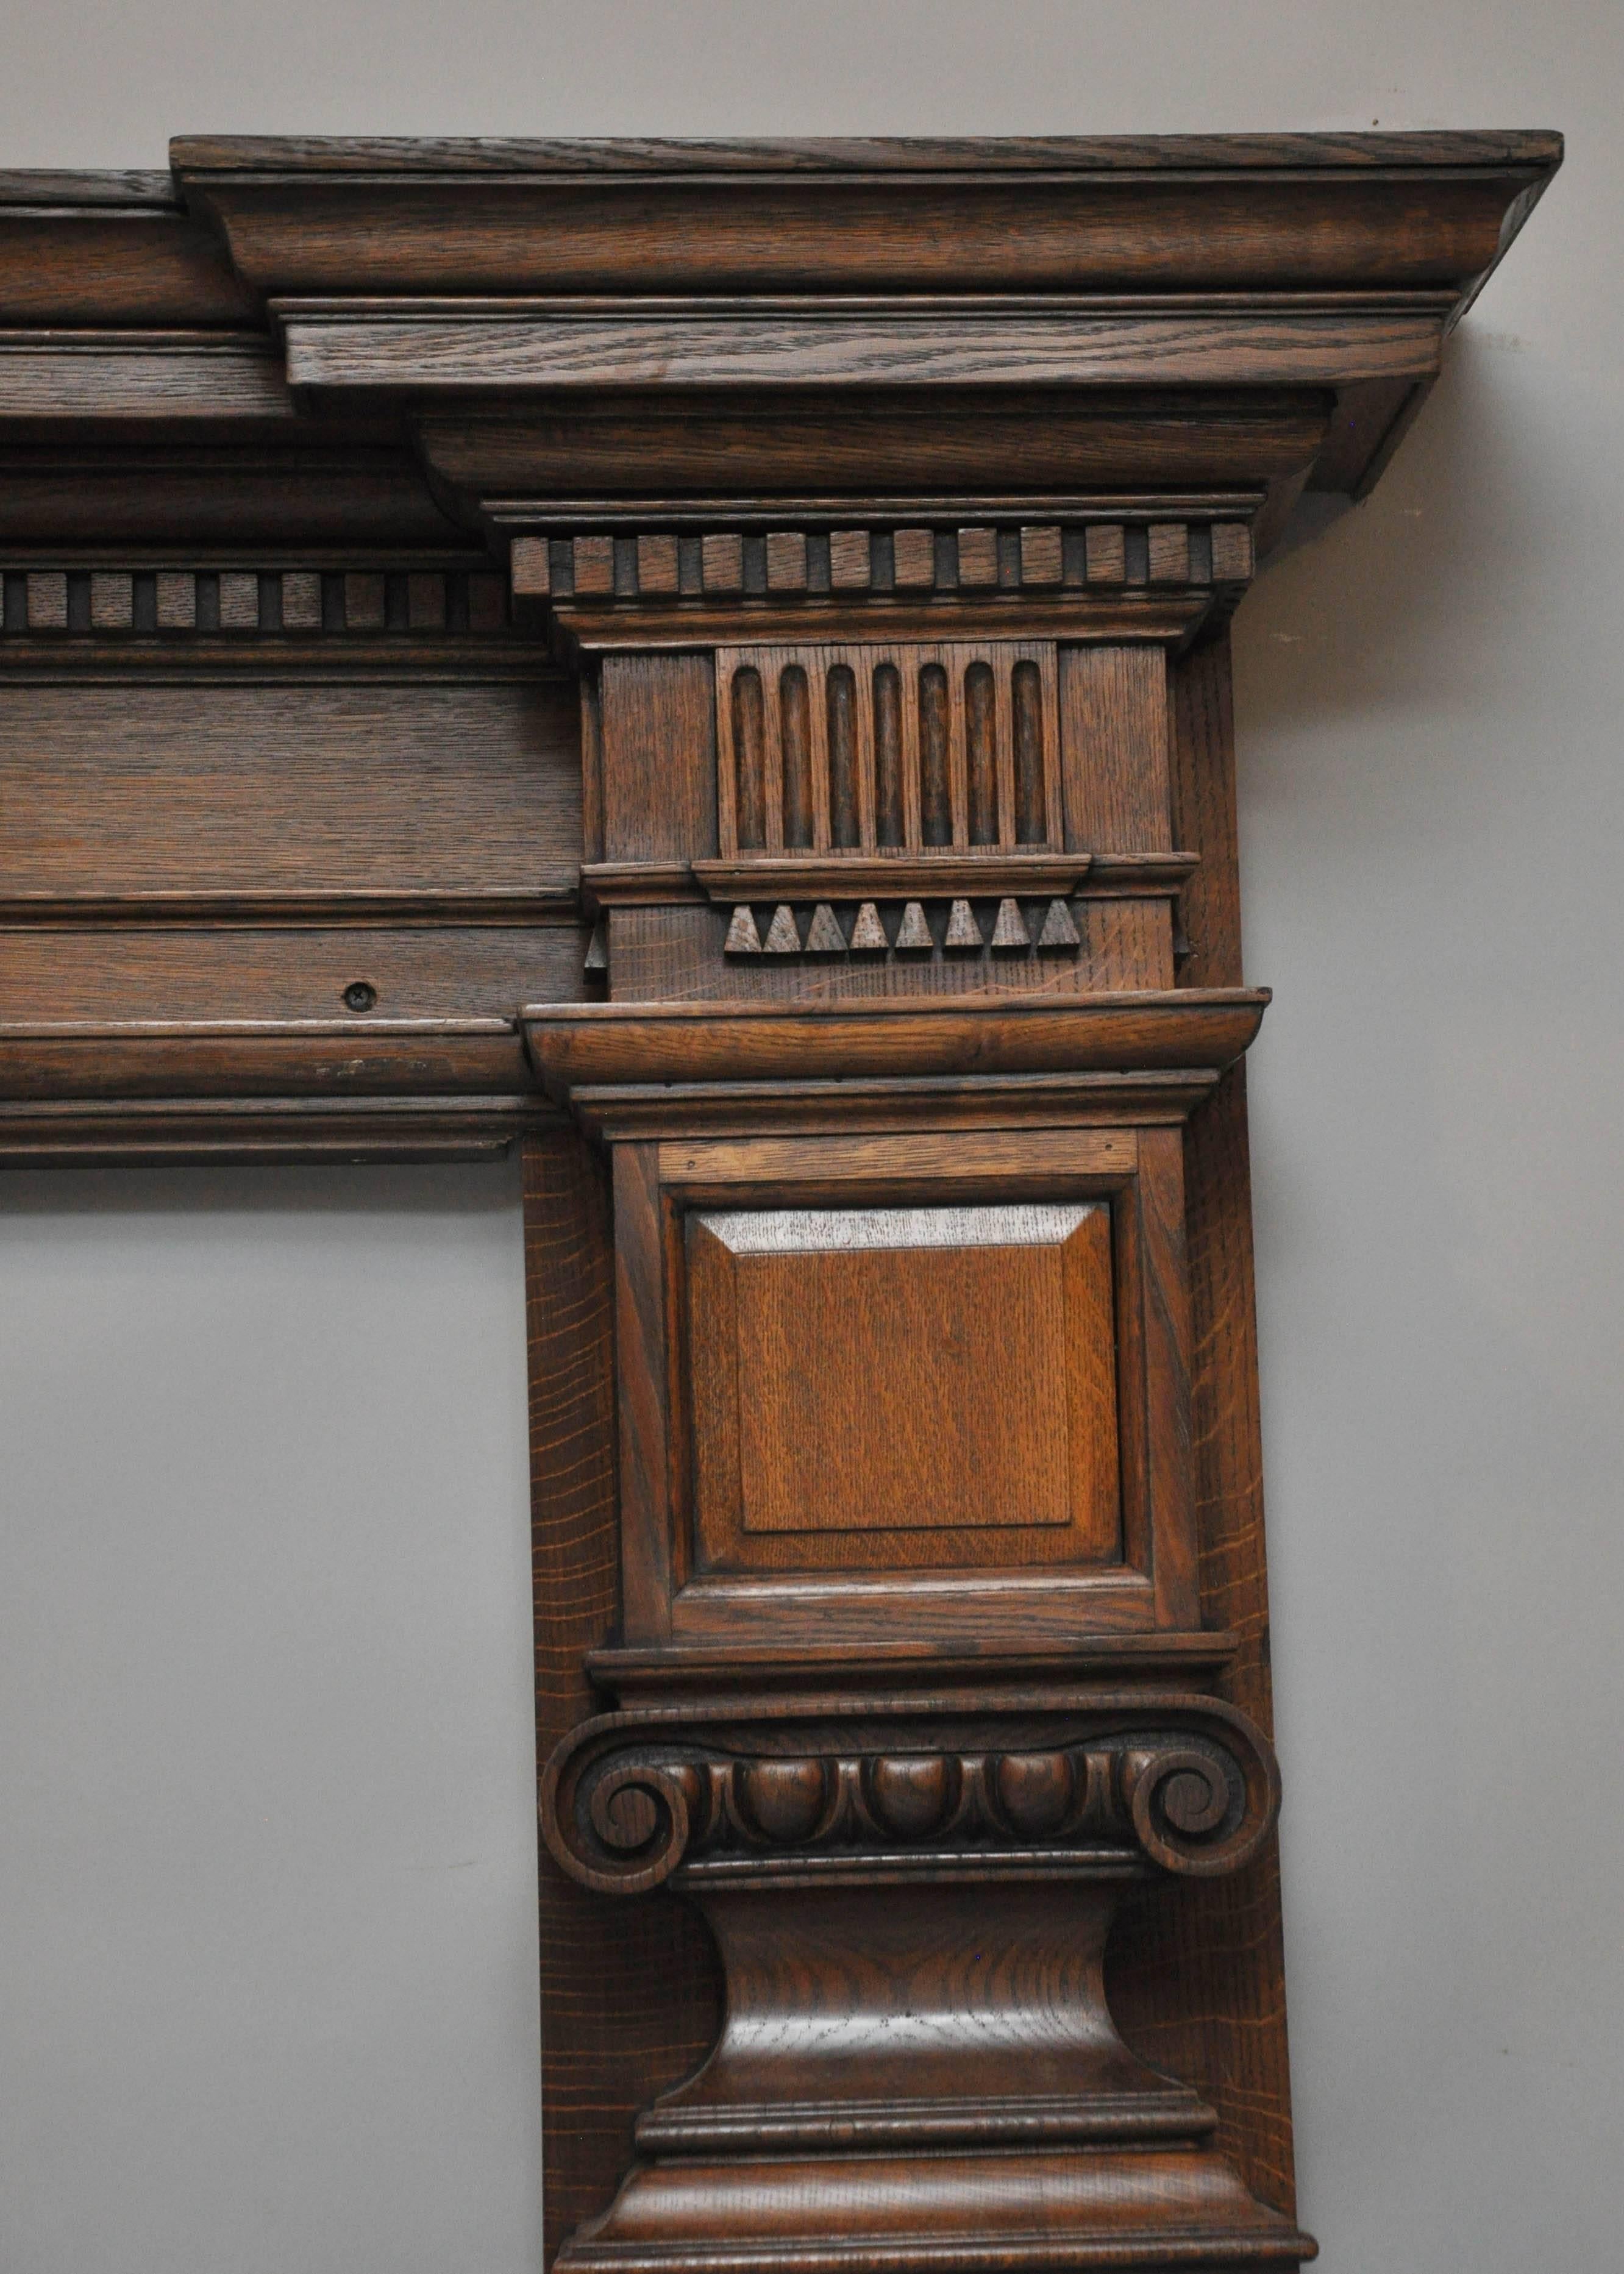 19th Century Palatial English oak fireplace mantel in the tudor style. Shapely top surface above a a stepped recessed frieze with dental detail trim; on either side of freize panel is a square recessed block above an Ionic columns, cap with